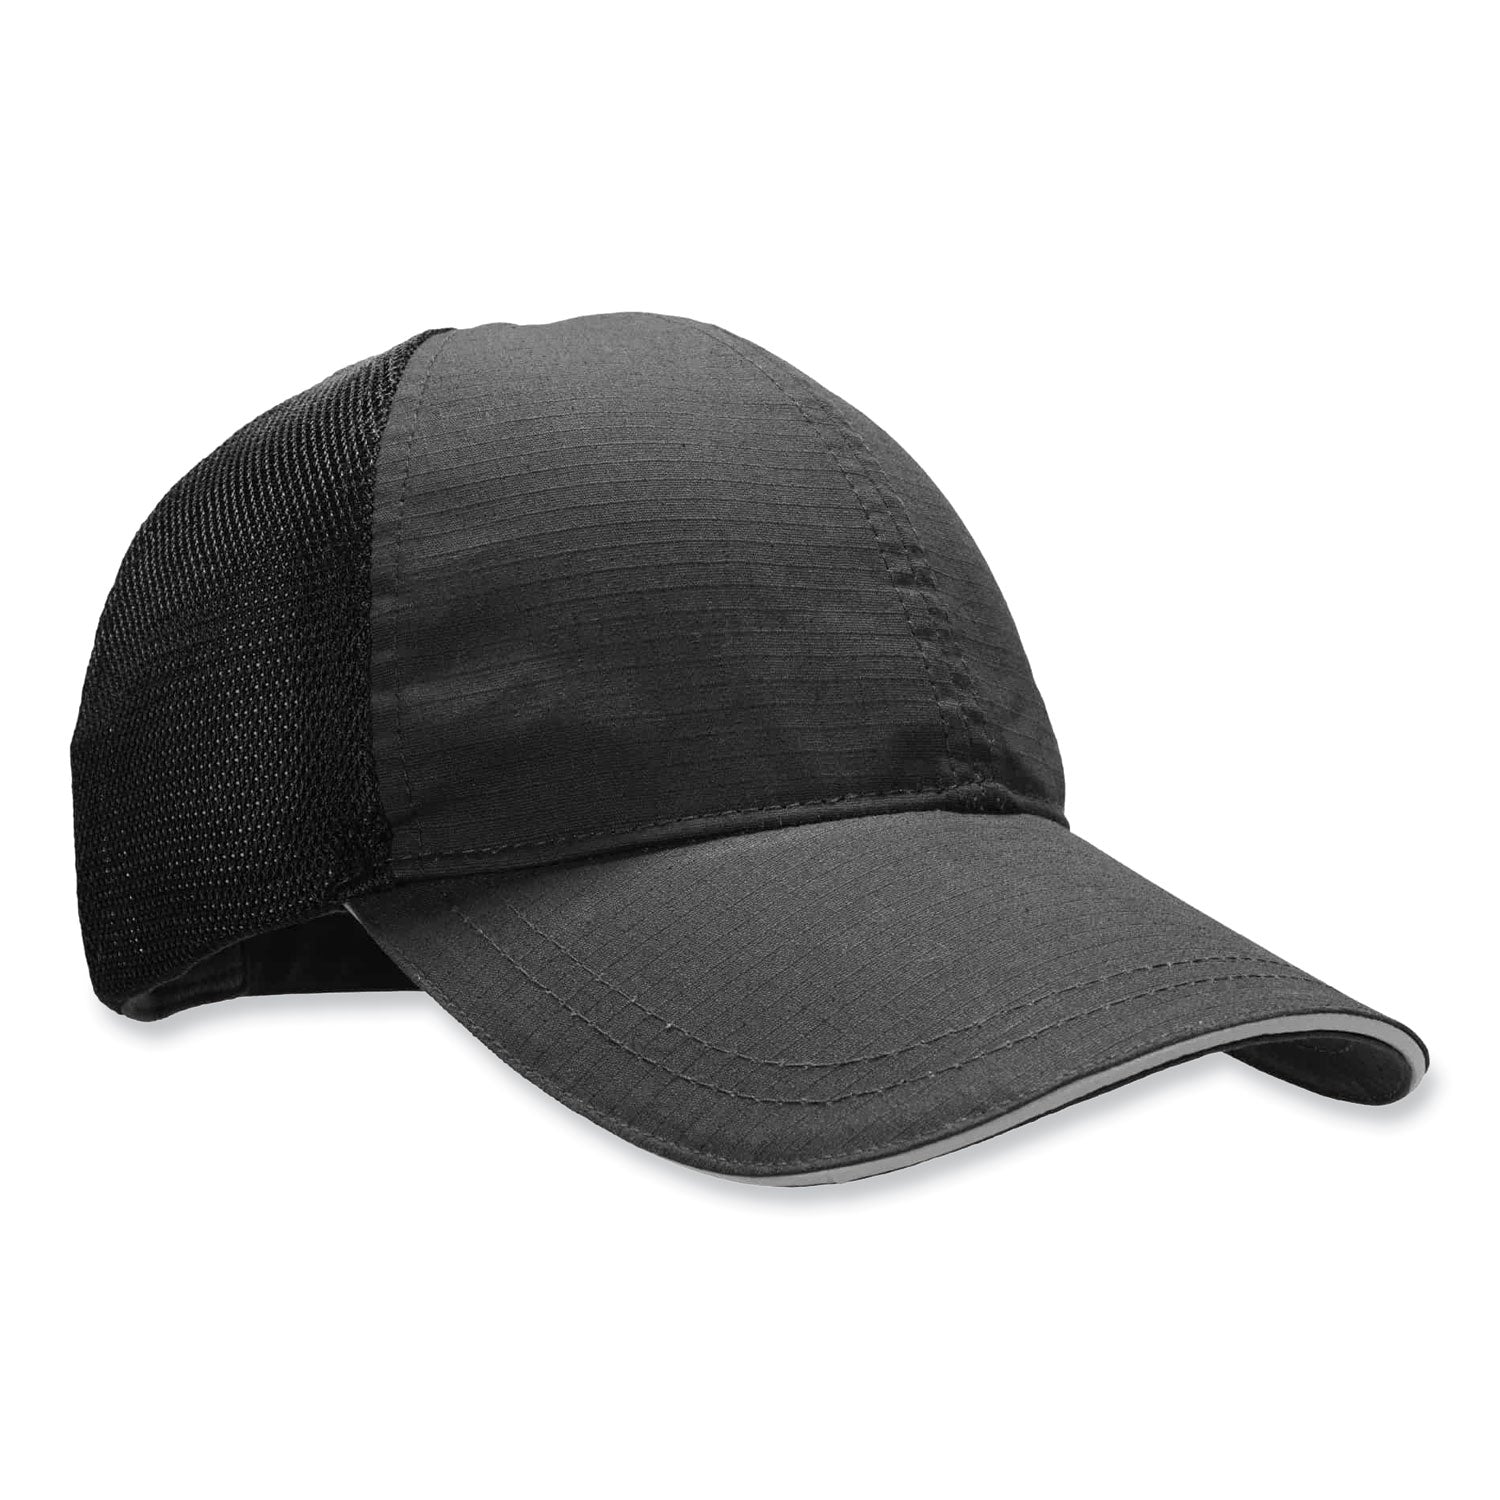 skullerz-8946-baseball-cap-cotton-polyester-one-size-fits-most-black-ships-in-1-3-business-days_ego23400 - 1